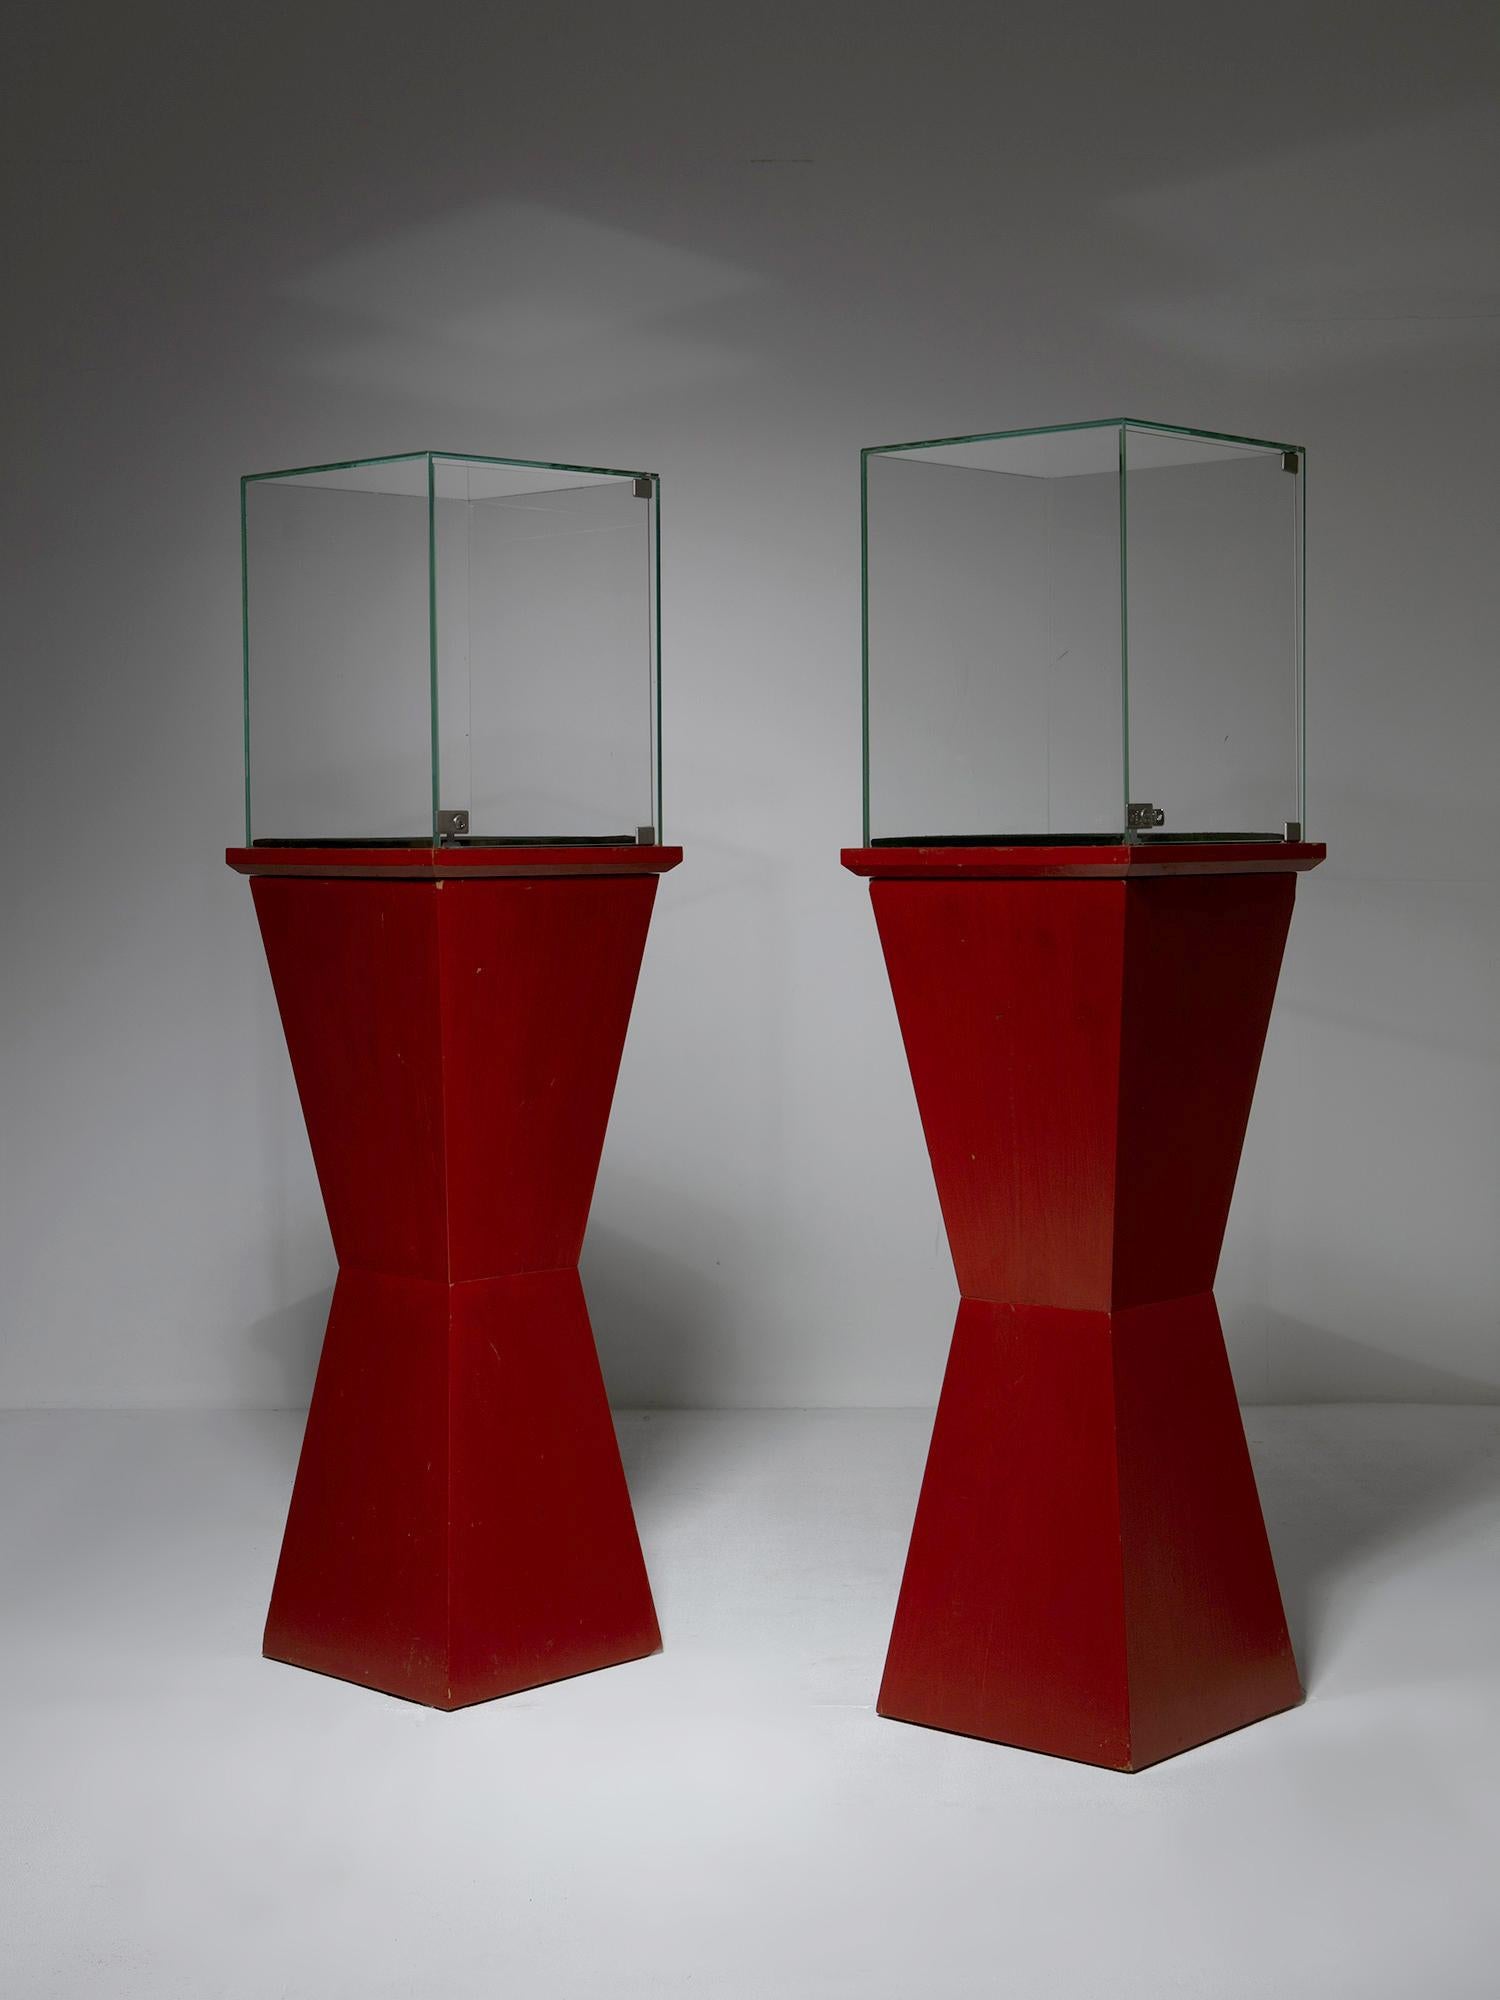 Pair of free standing displays with vitrine. 
Post modern influence for these solid wood stands.
